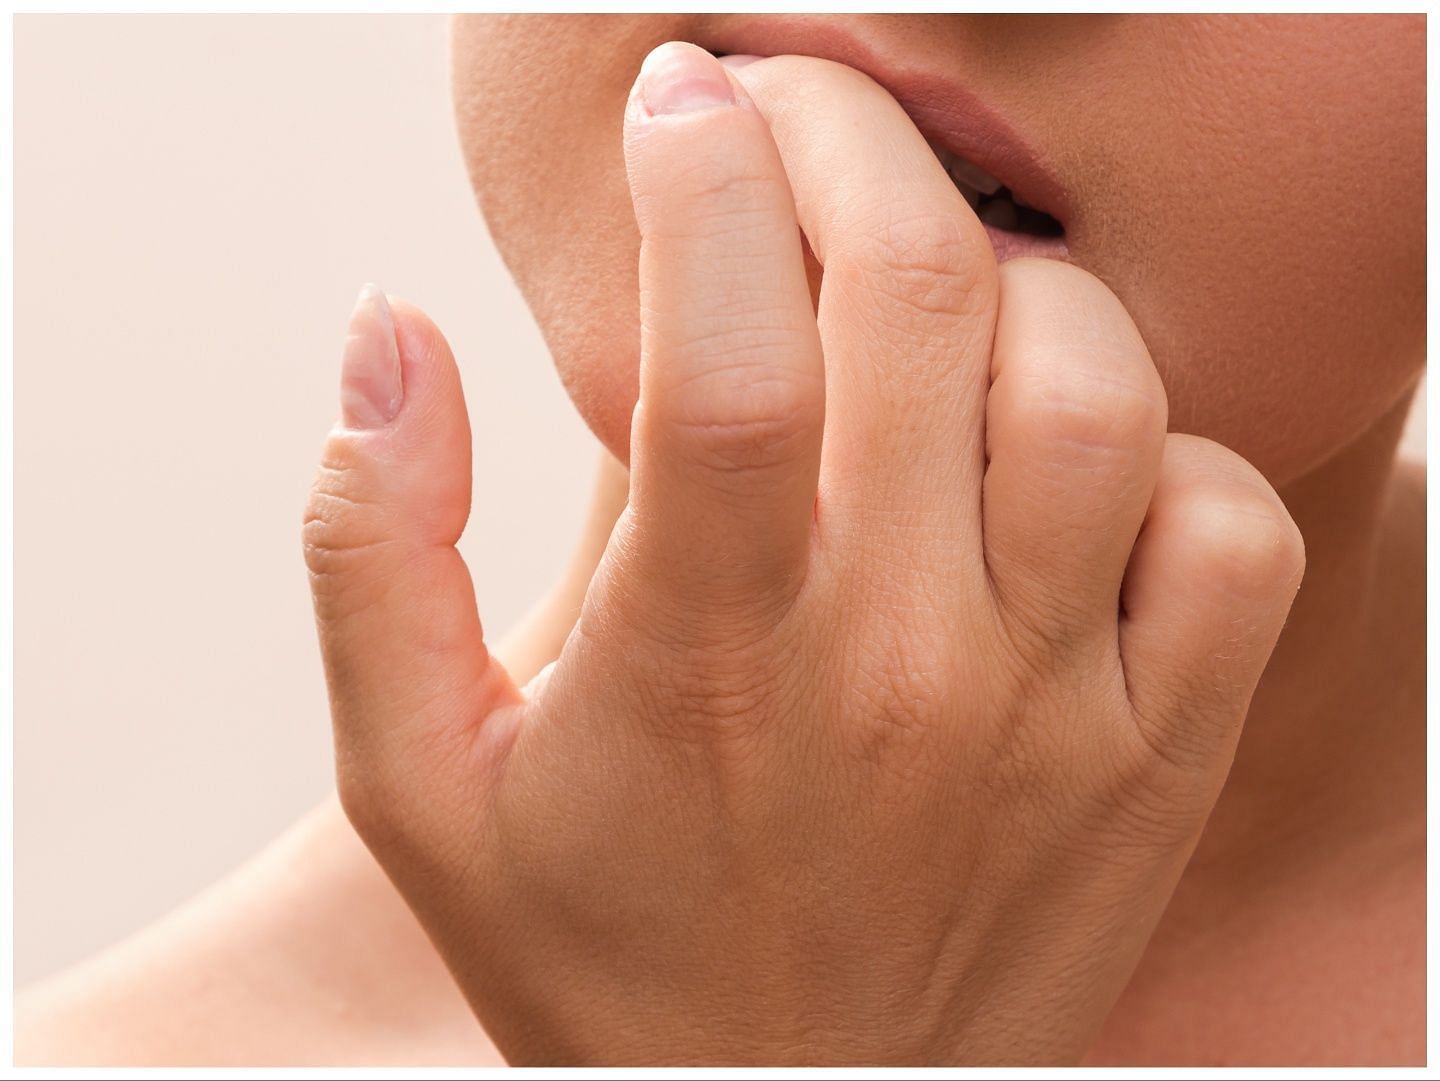 Is Chronic Nail Biting a Bad Habit, OCD, or Something More? - GoodRx